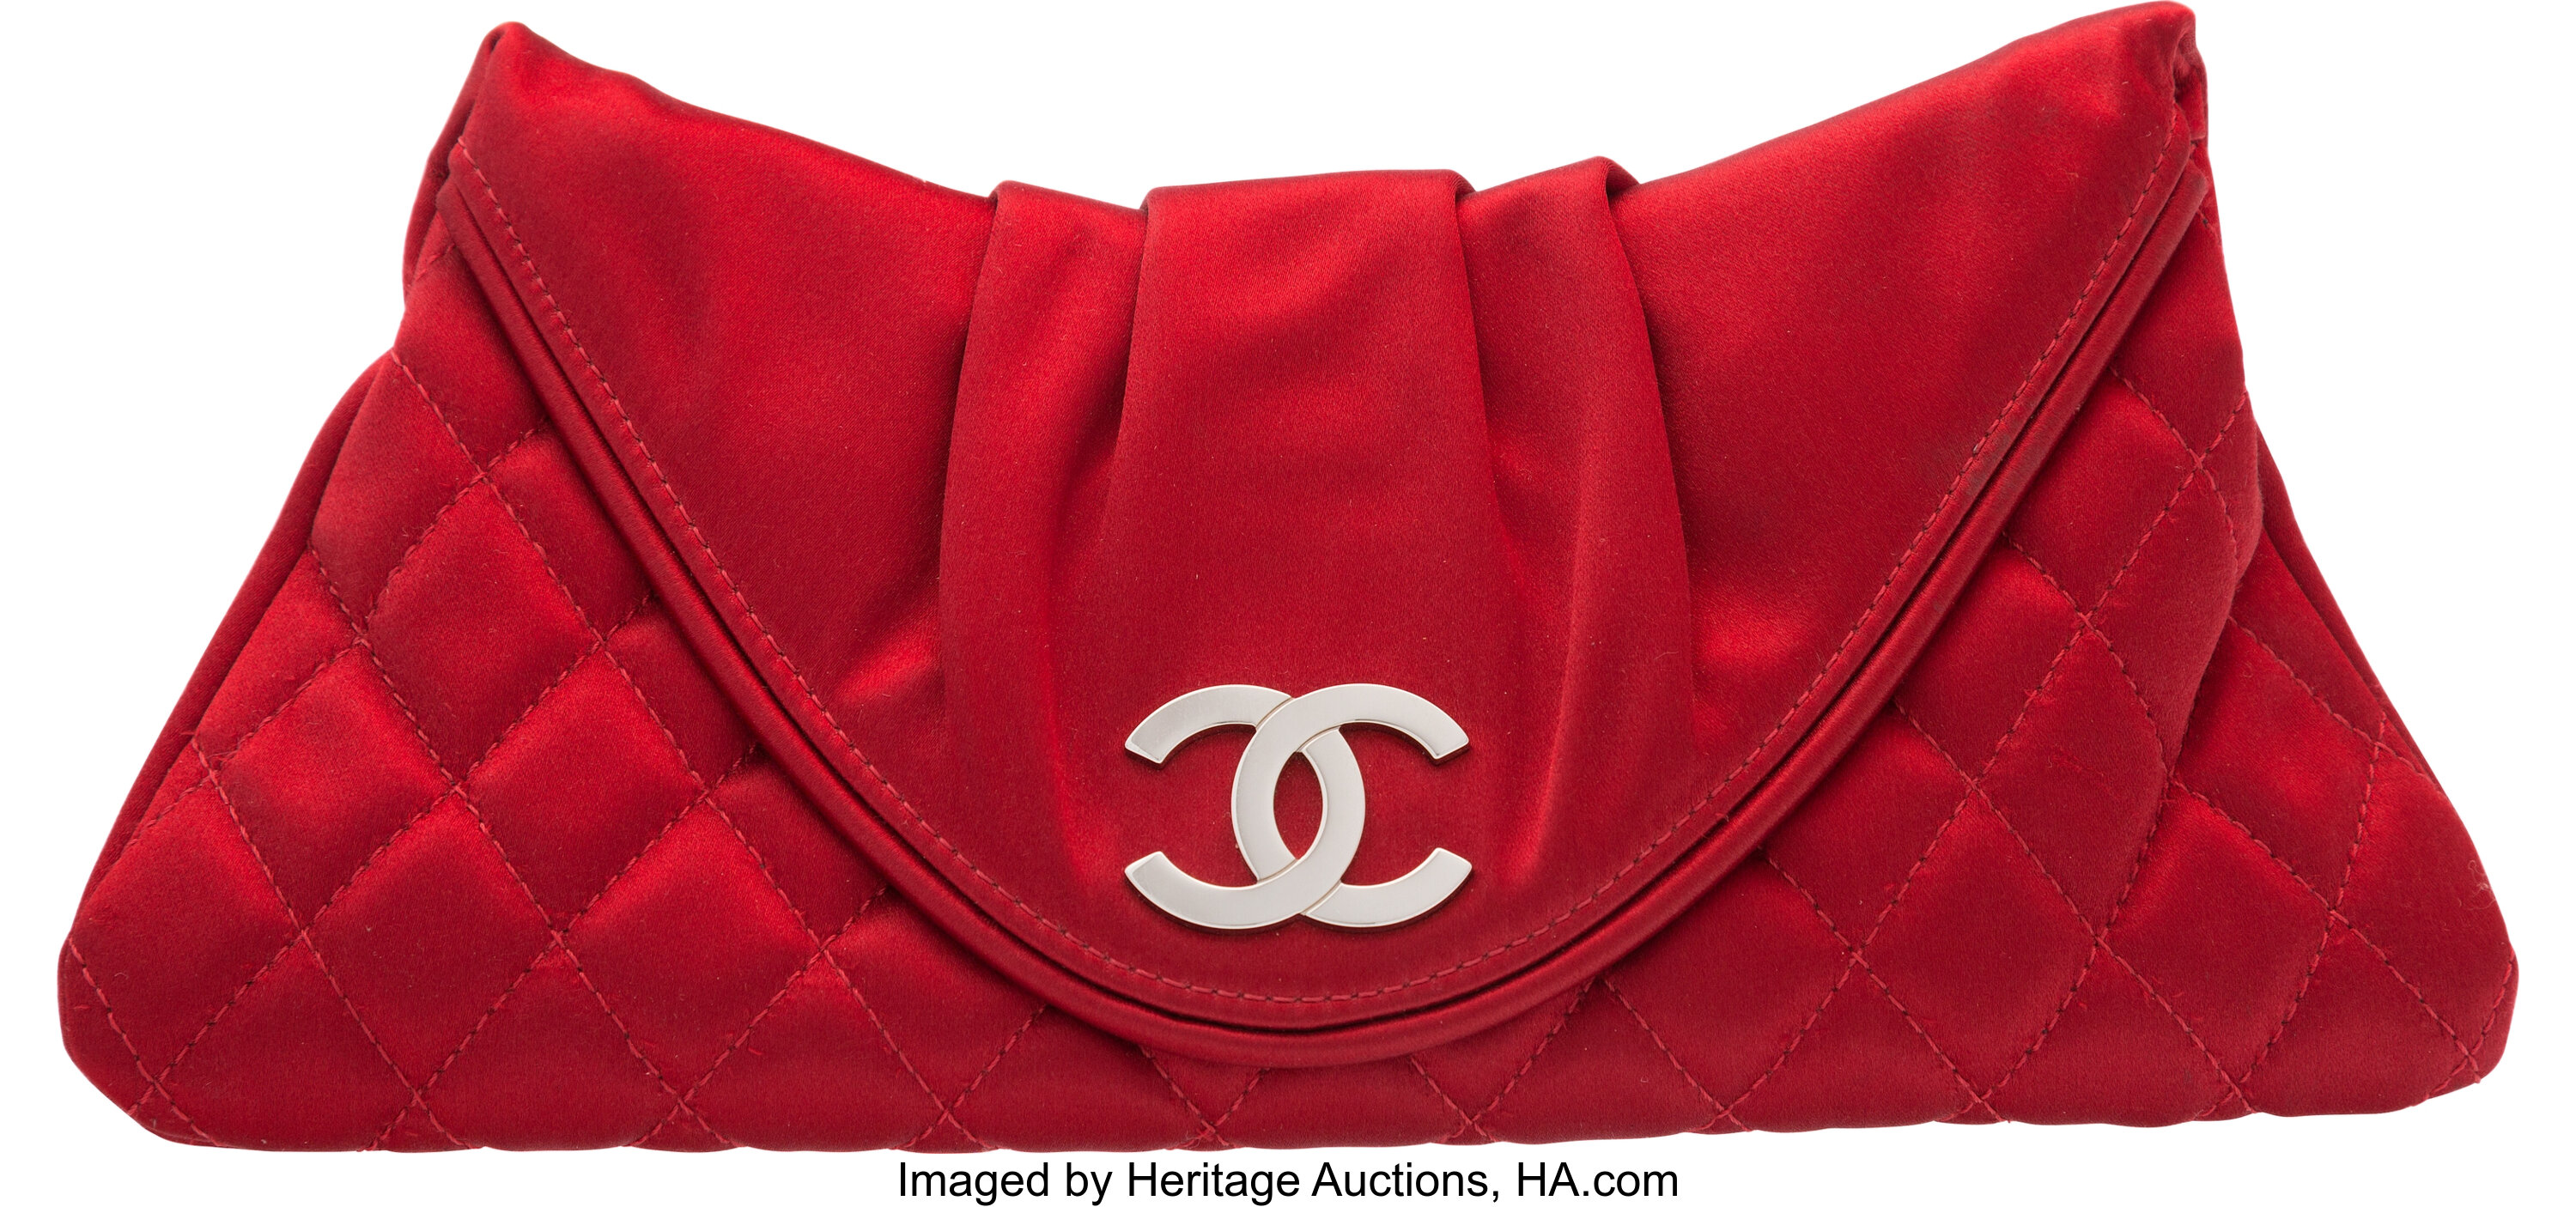 Chanel Red Quilted Satin Half Moon Clutch Bag. Very Good Condition